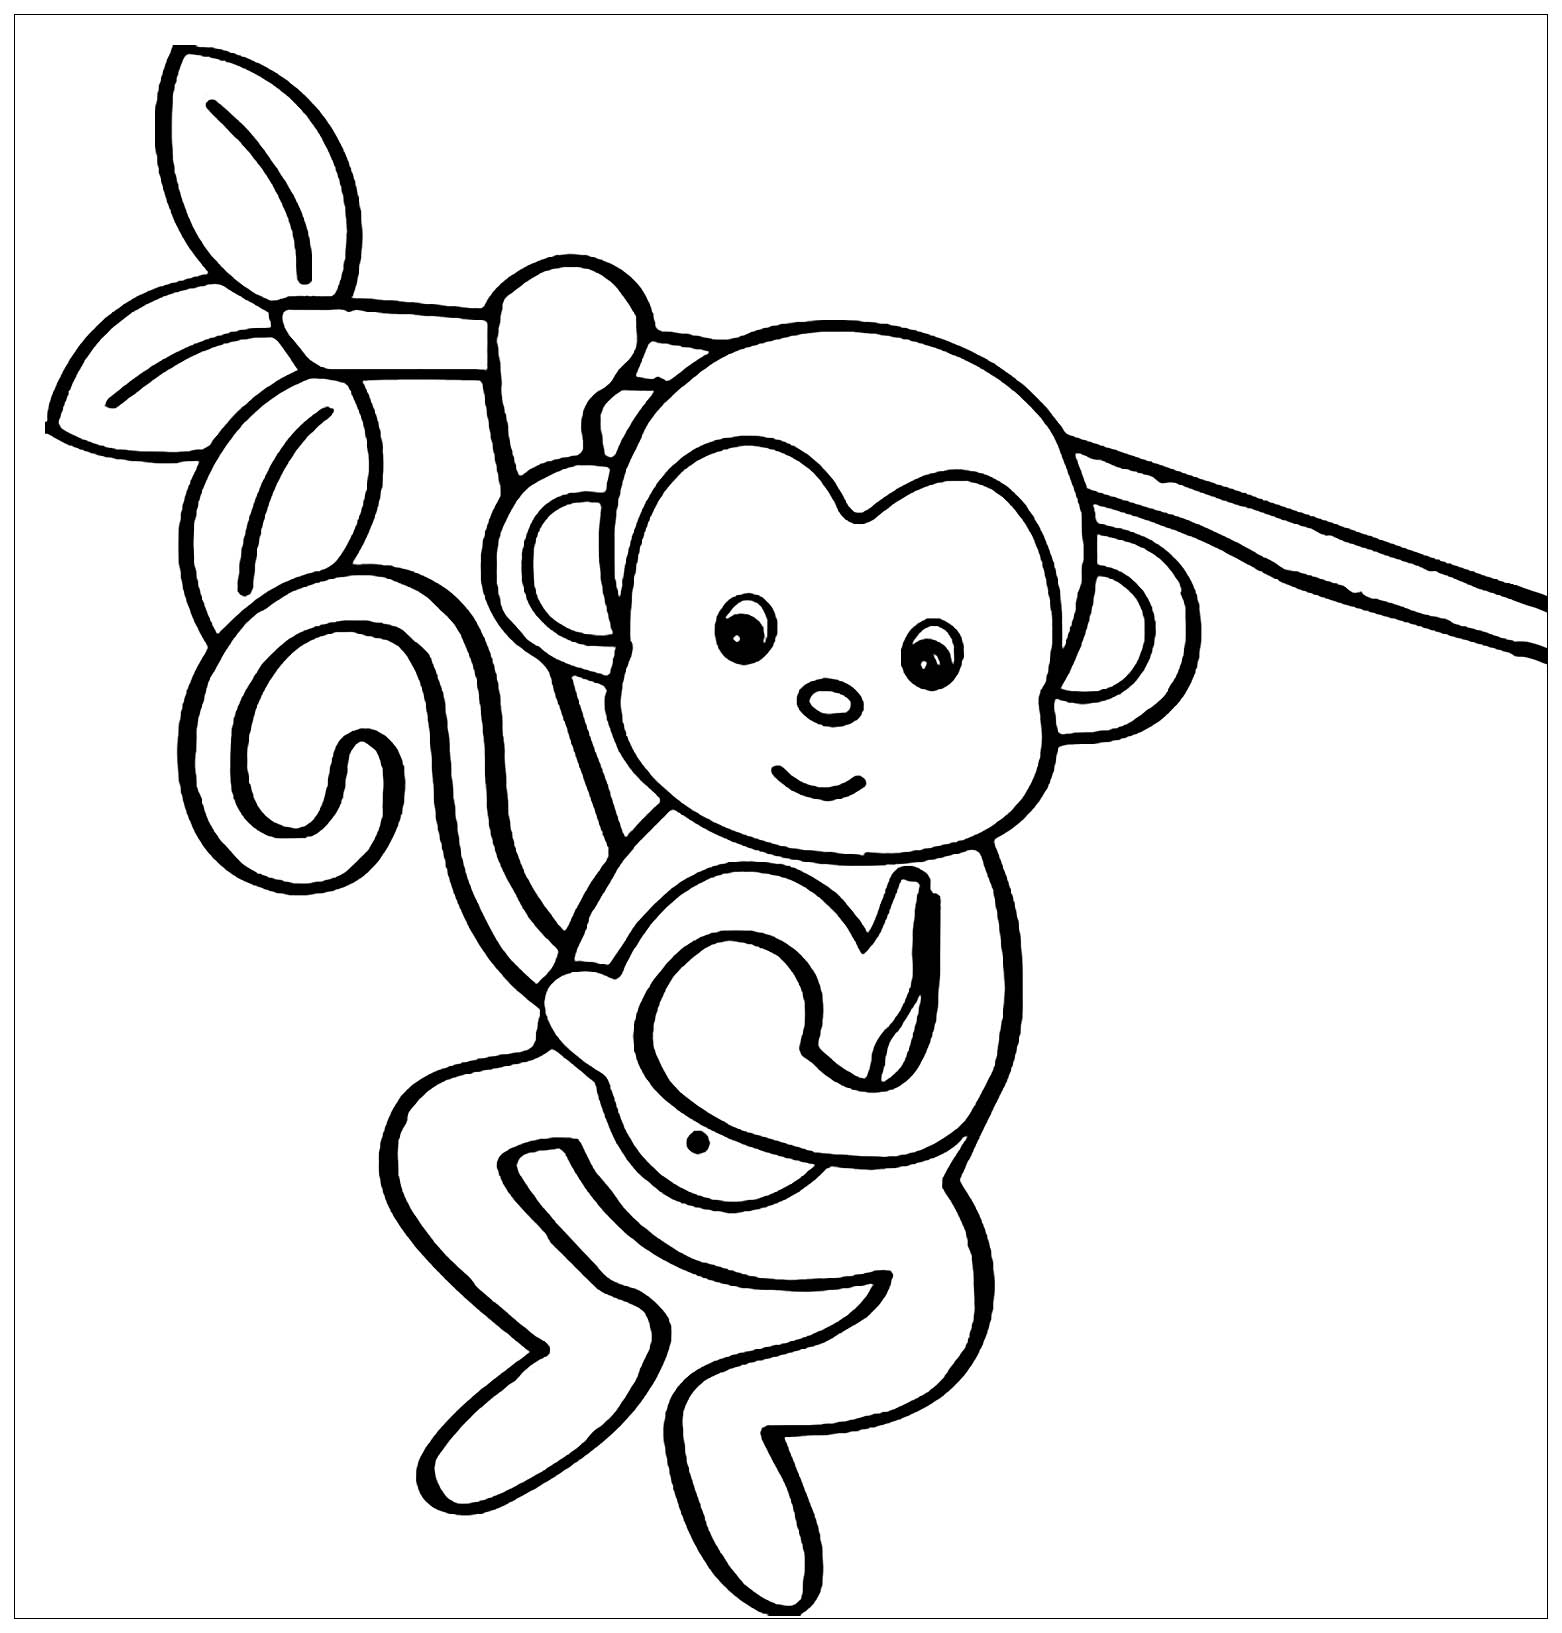 Monkey coloring for kids - Monkeys Kids Coloring Pages